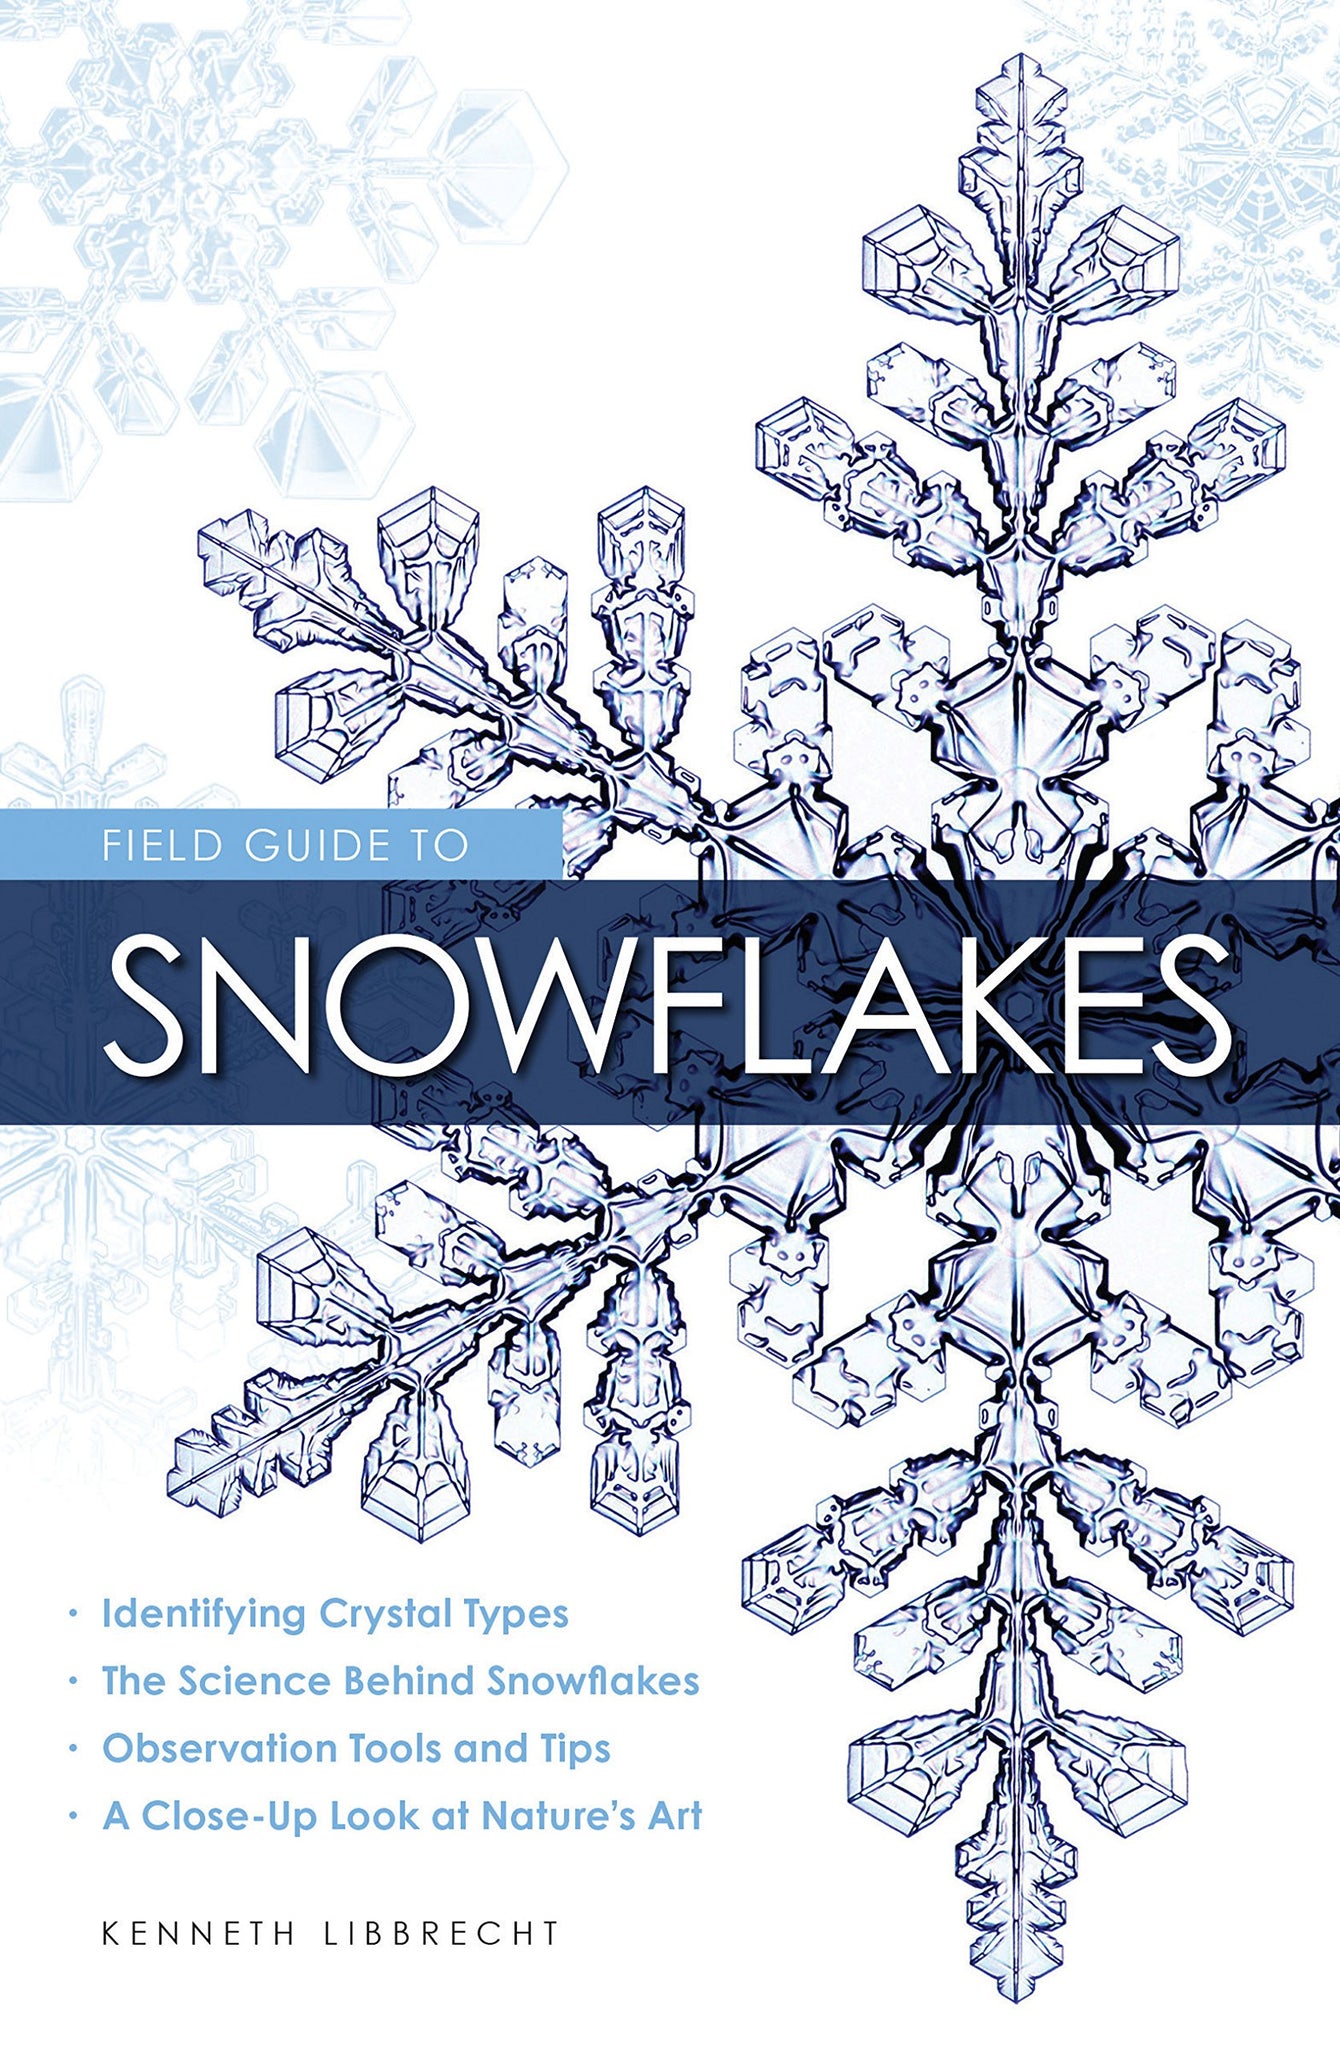 Field Guide to Snowflakes by Kenneth George Libbrecht